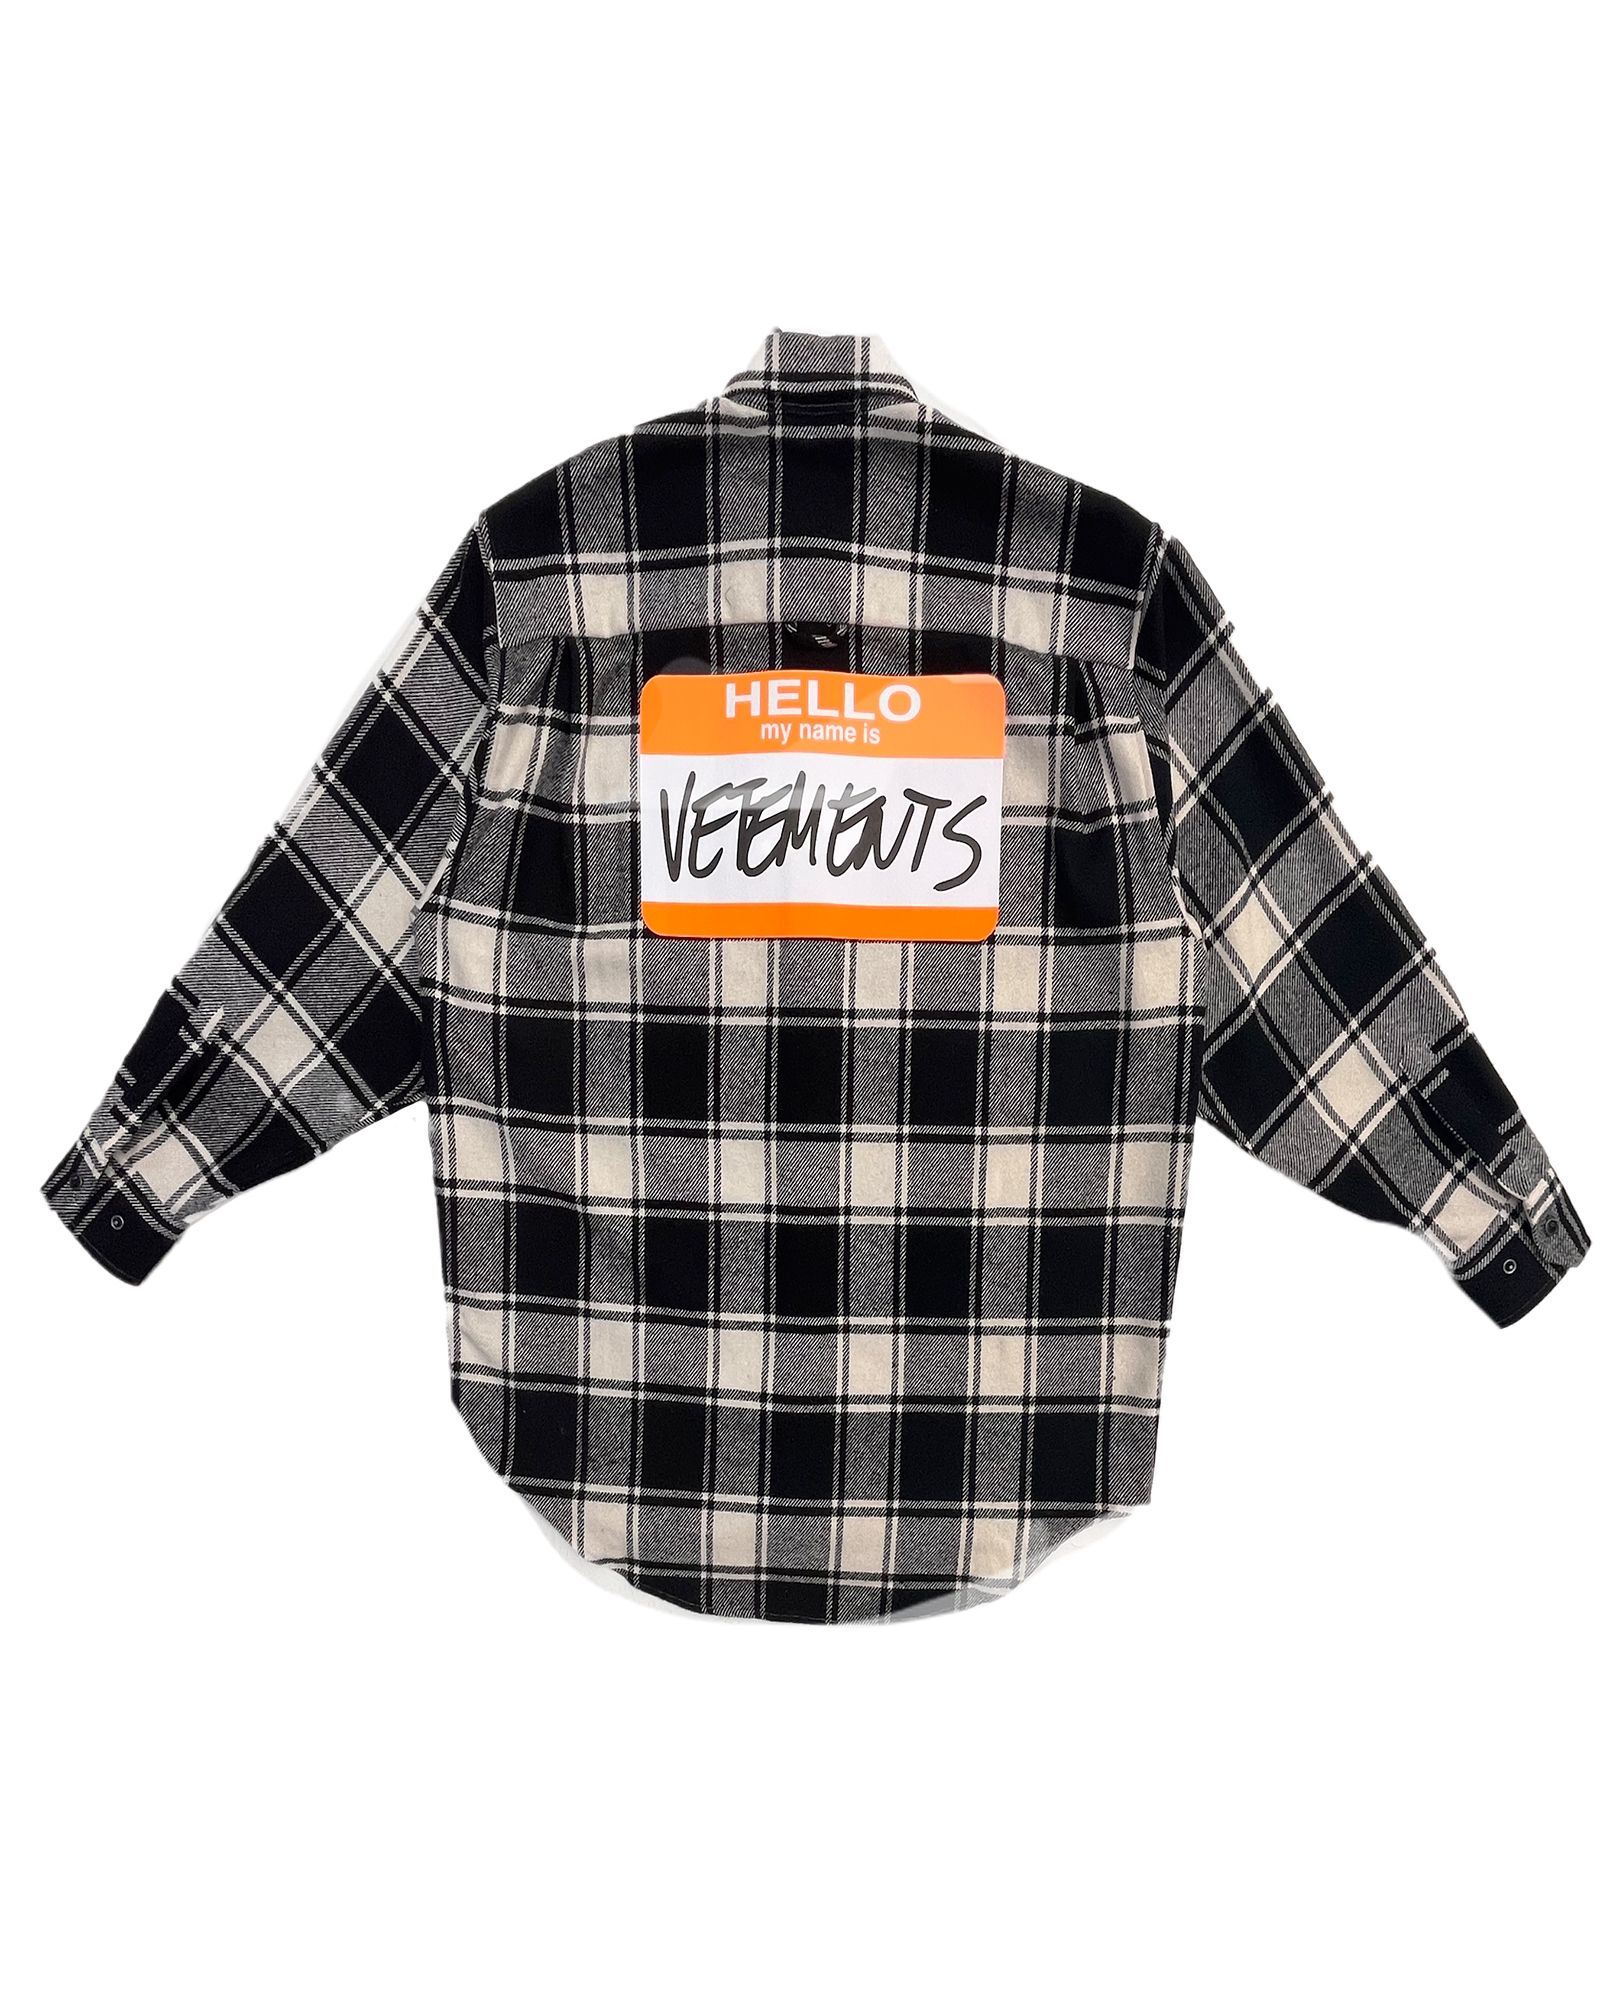 VETEMENTS - My name is vetements flannel shirt | Detail